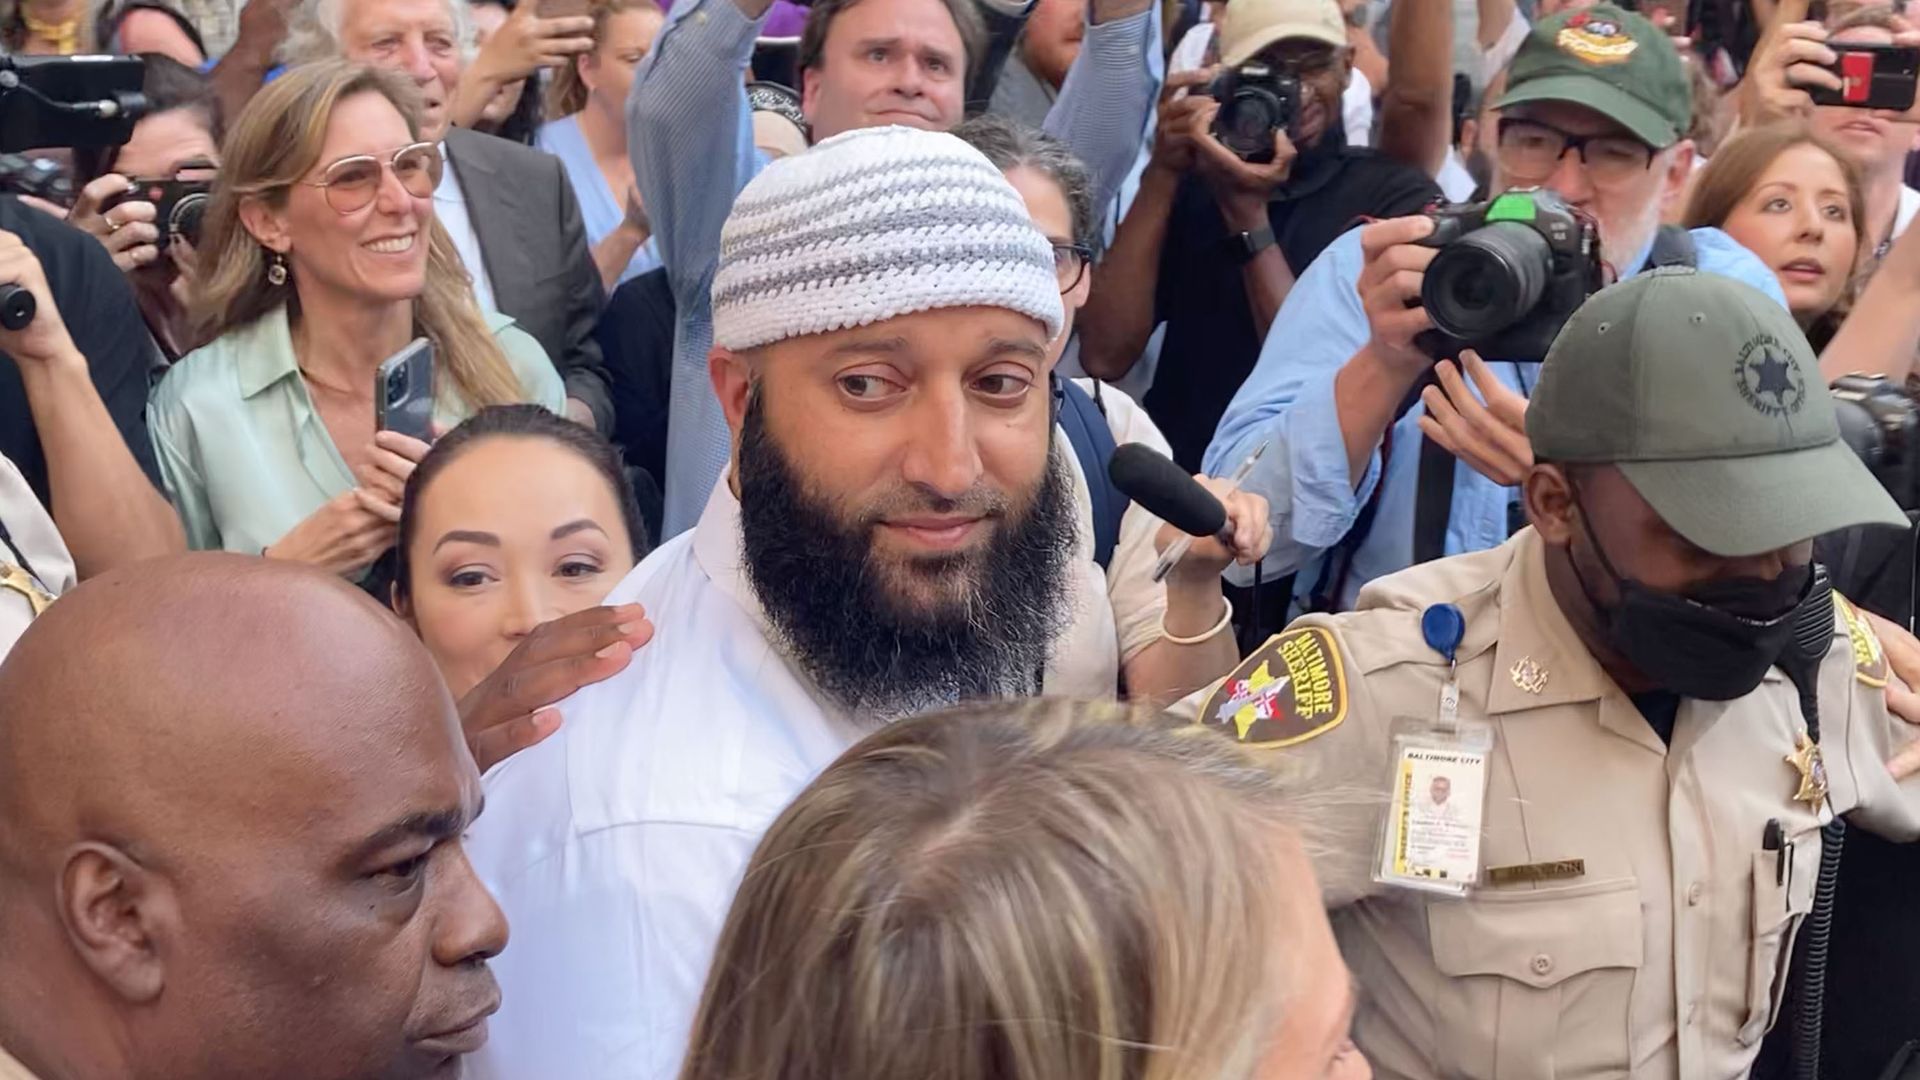 Adnan Syed leaving a courthouse after being released from prison in September 2022 in Baltimore.